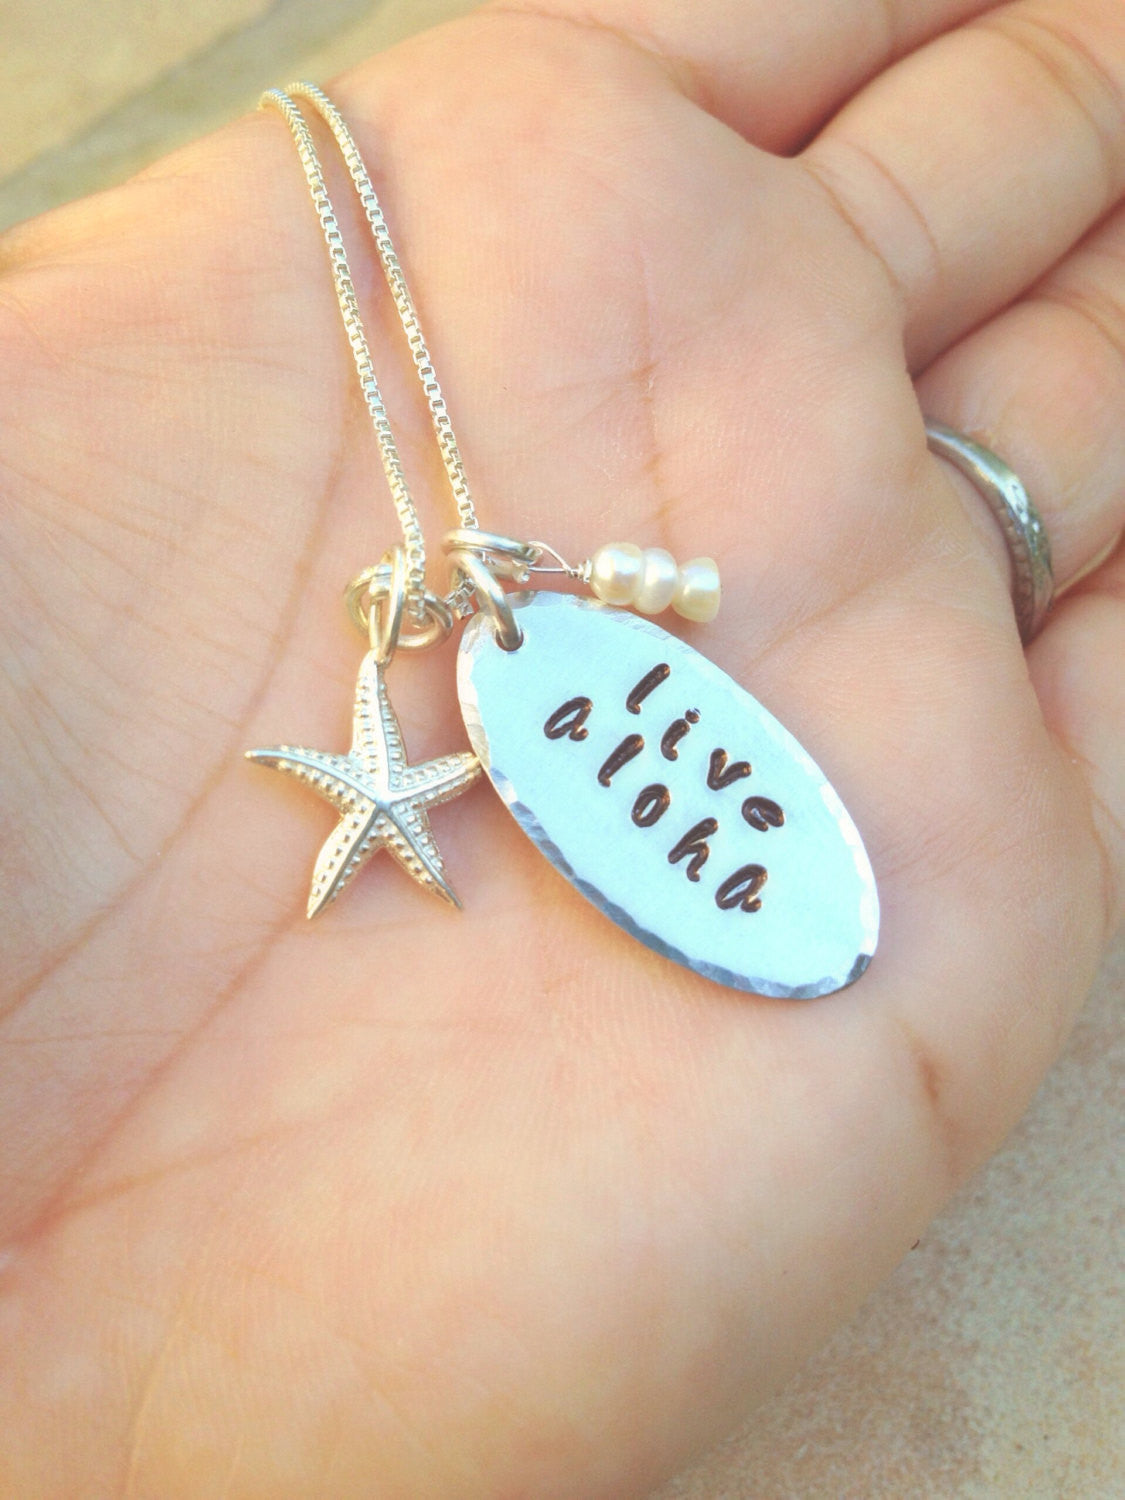 Live Aloha Necklace ,Hawaiian necklace, Natashaaloha - Natashaaloha, jewelry, bracelets, necklace, keychains, fishing lures, gifts for men, charms, personalized, 